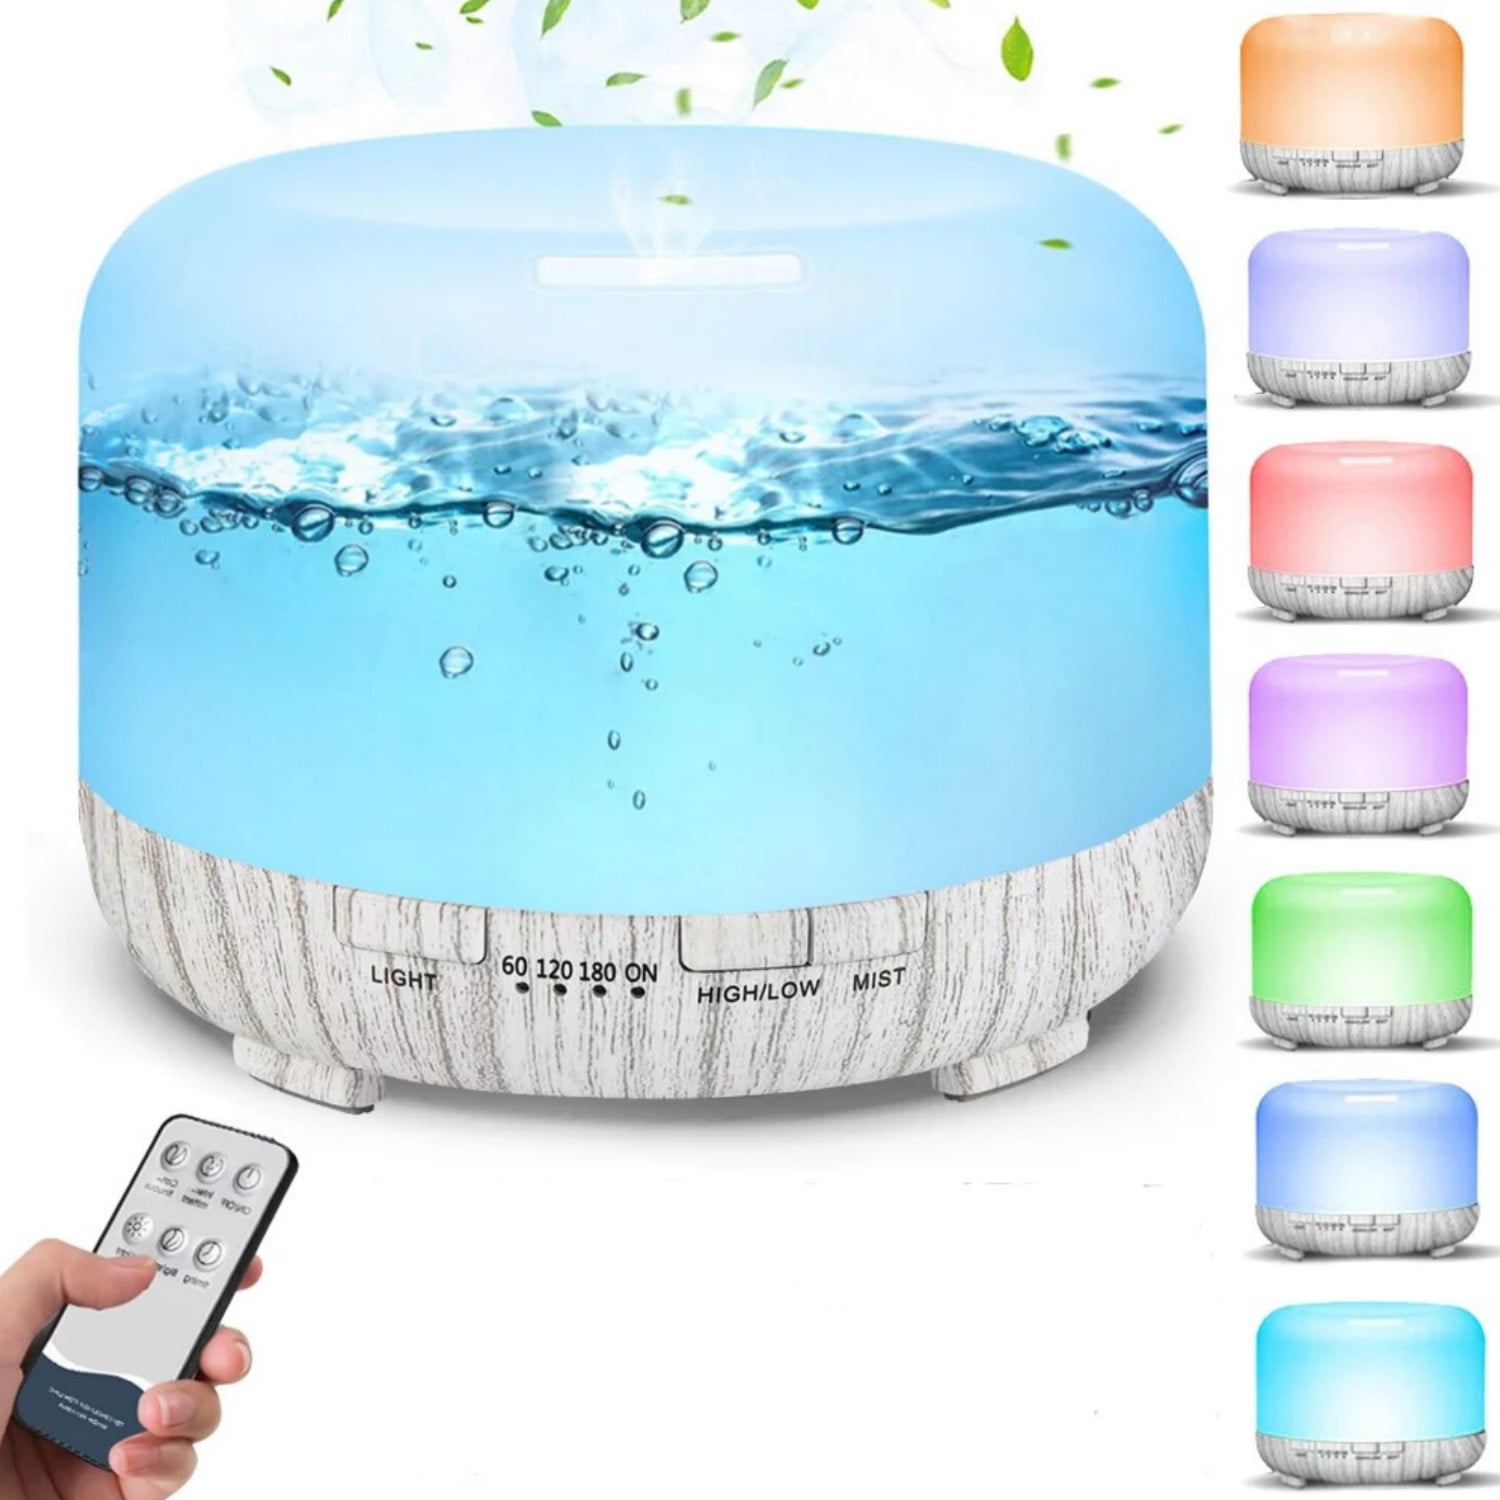 Fimilo 500ml Upgraded Air Diffuser, Ultrasonic Aroma Essential Oil Diffuser  with Remote Control, Aromatherapy Fragrant Oil Air Humidifier Vaporizer